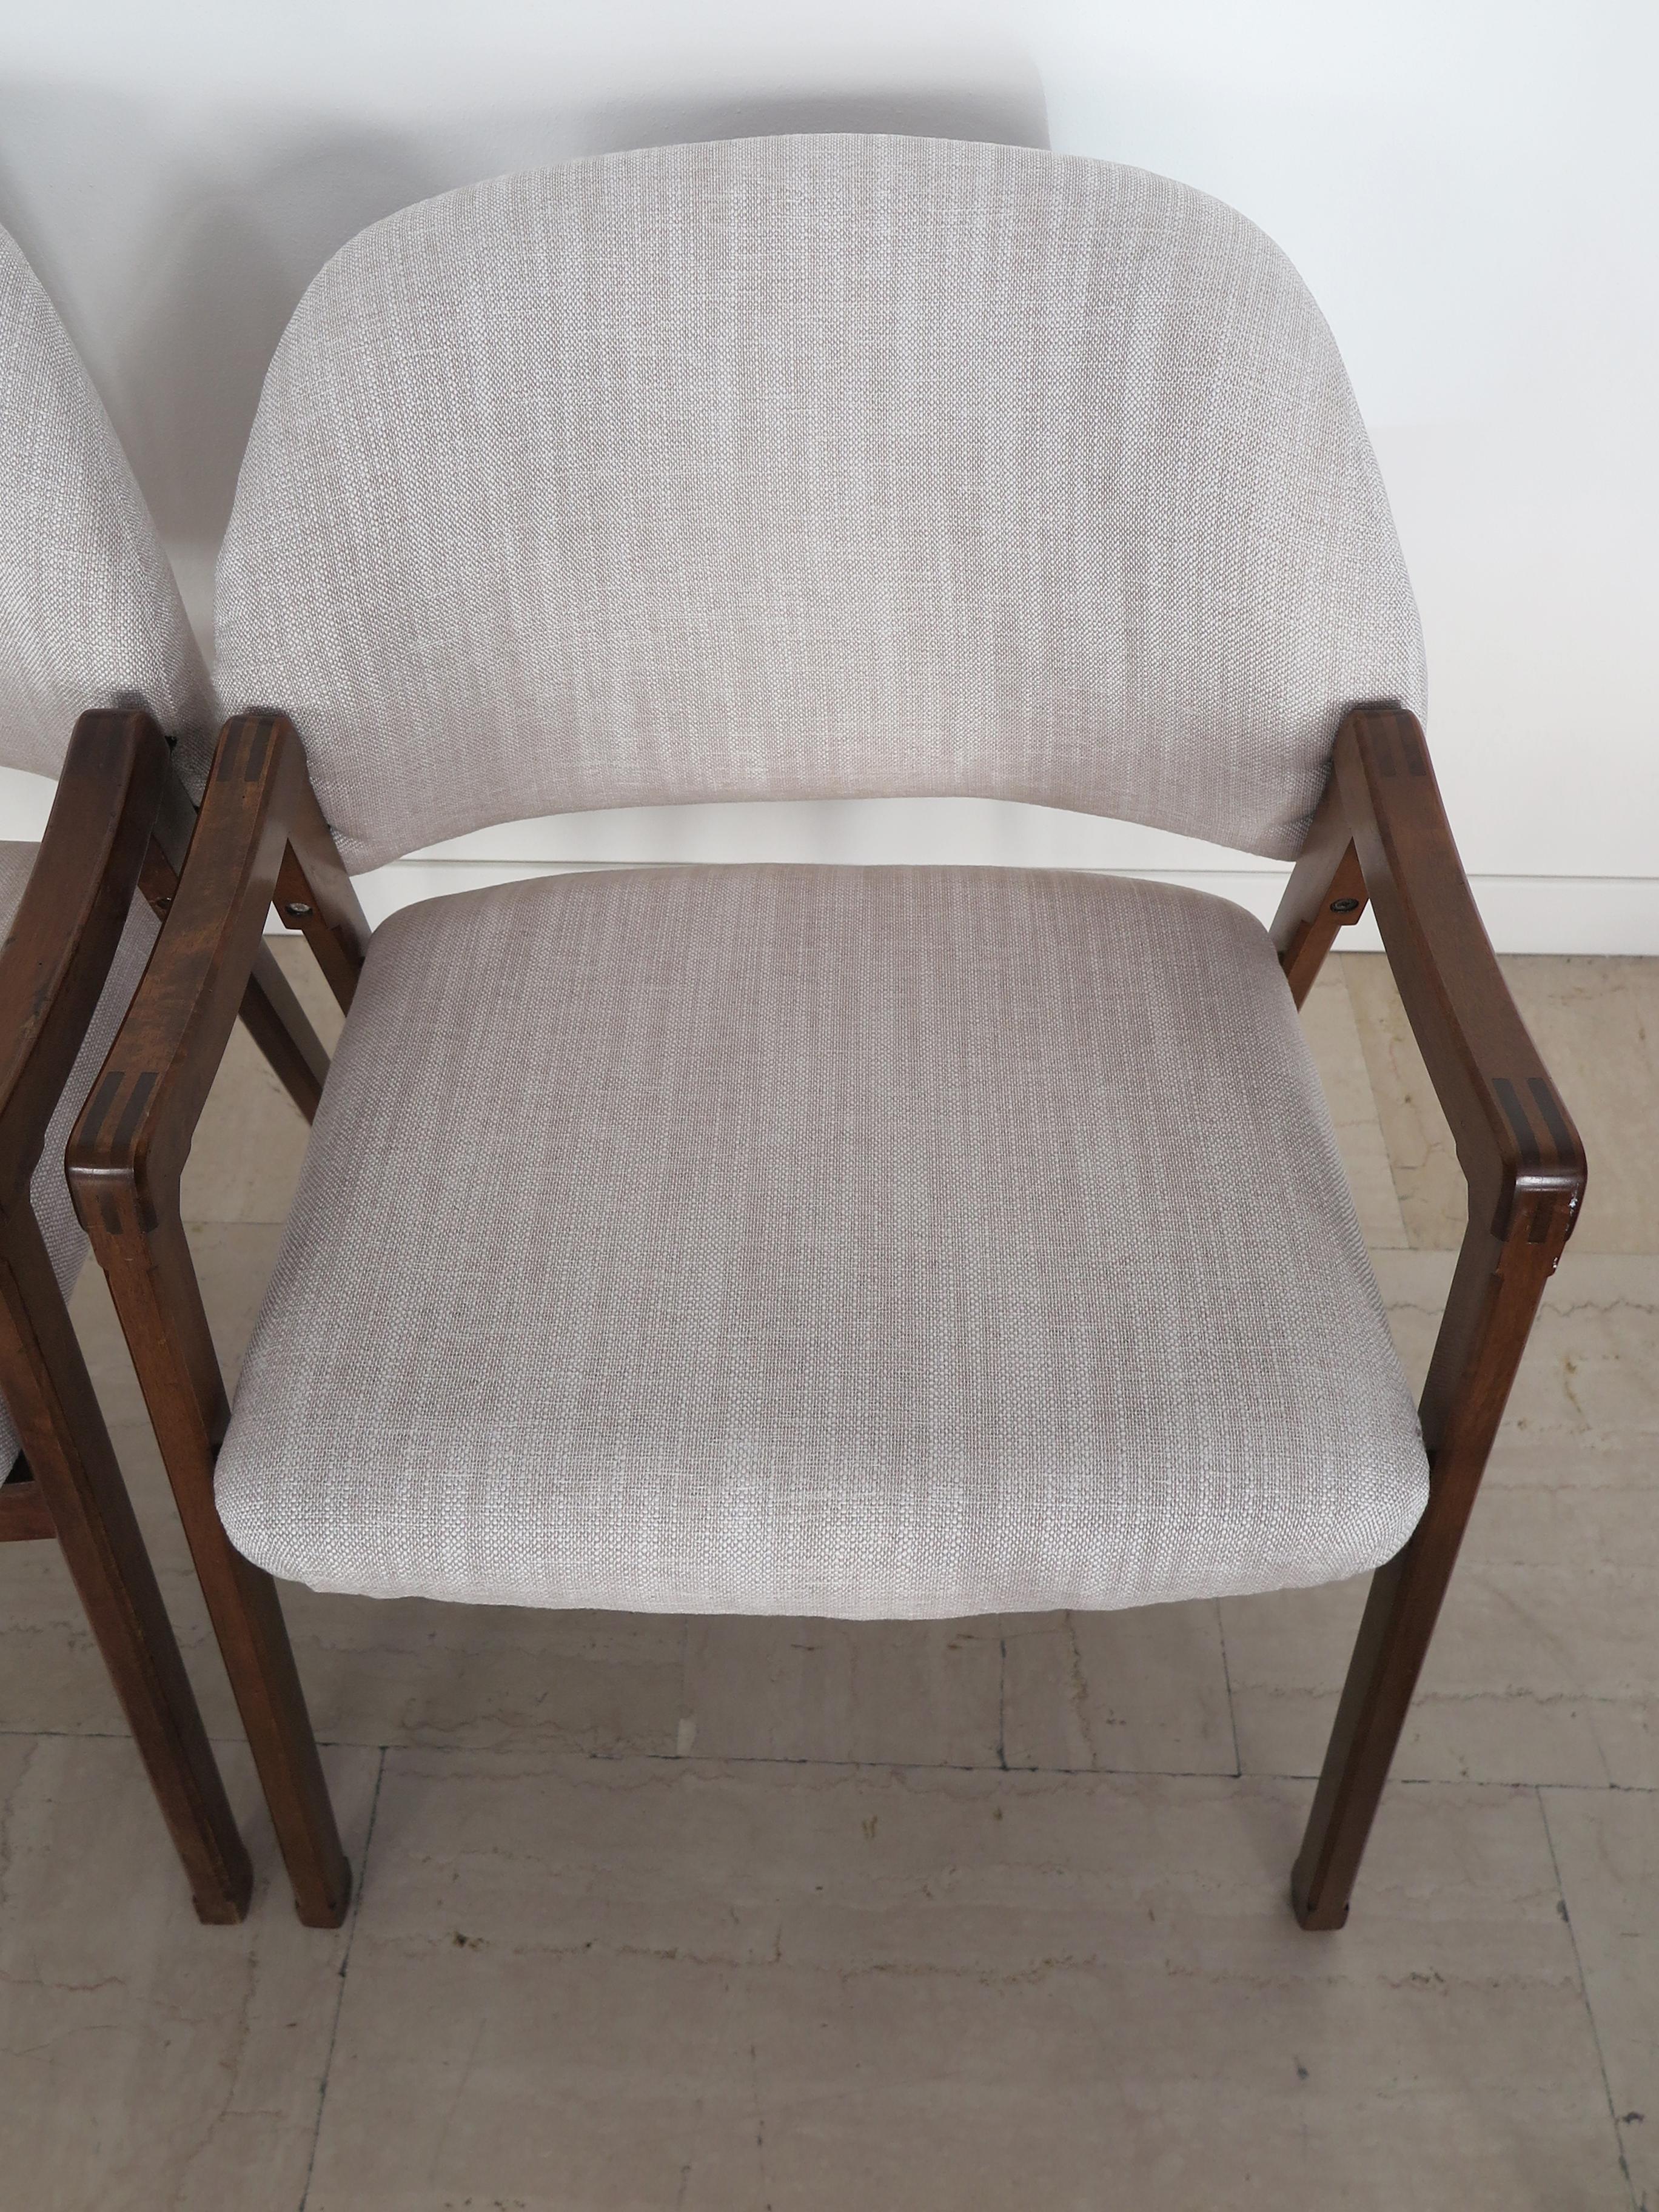 Ico Parisi Italian Midcentury Fabric Wood Armchair Model 814 for Cassina, 1960s For Sale 6